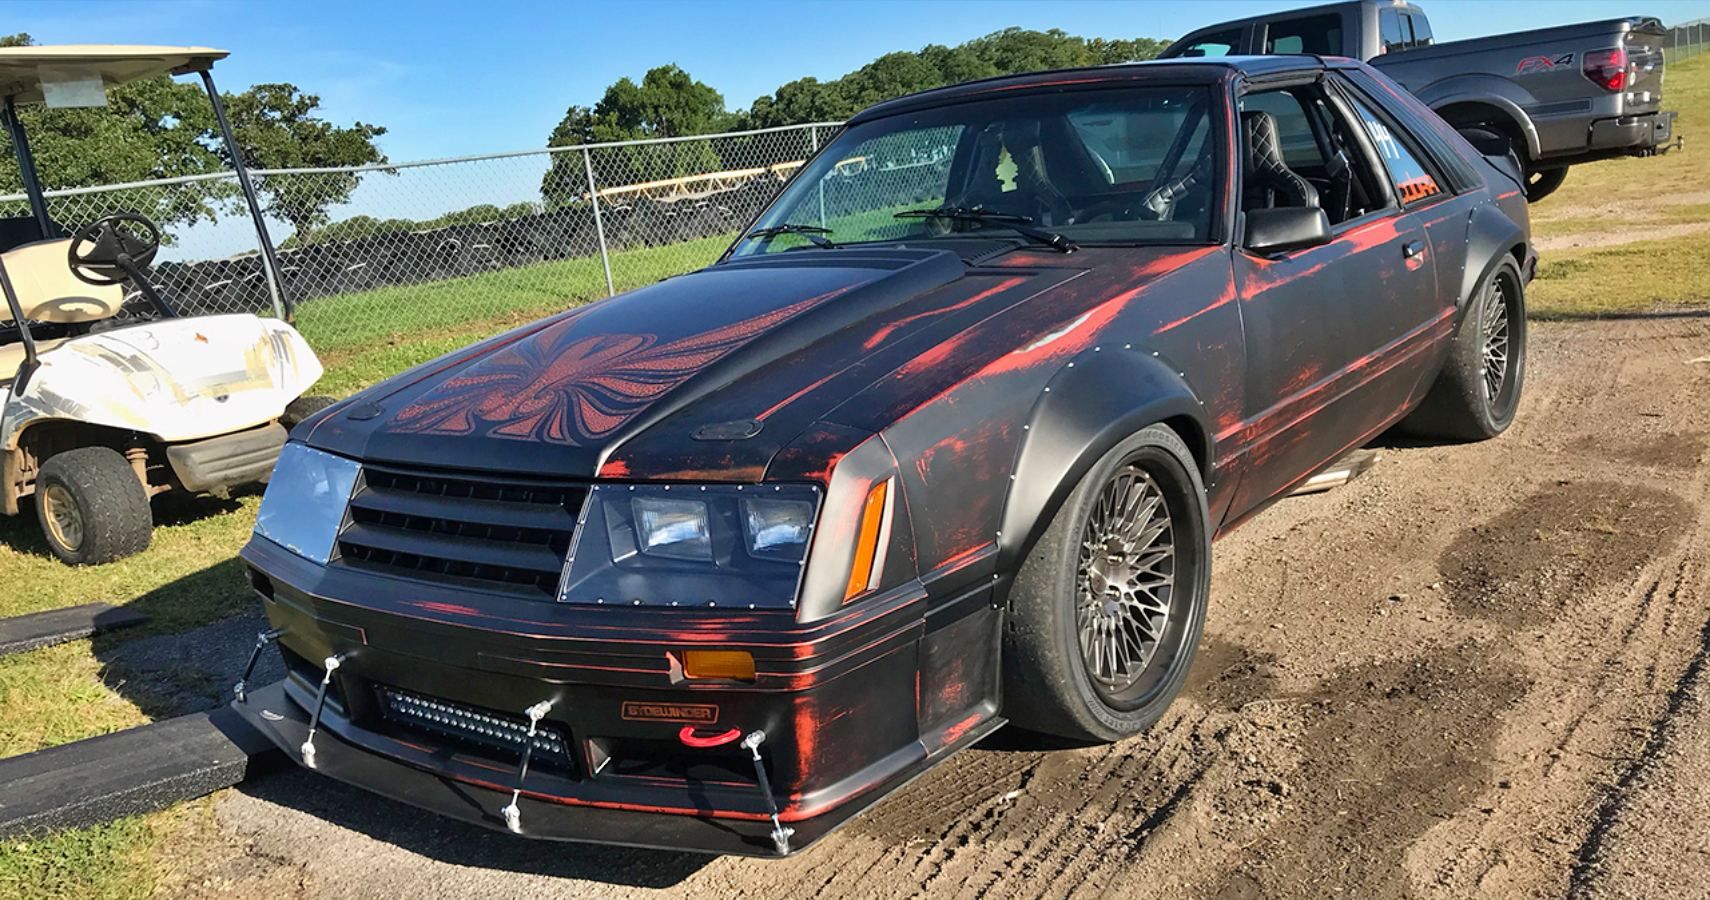 This Custom Fox Body Mustang Has Been Transformed Into Weapon On Wheels